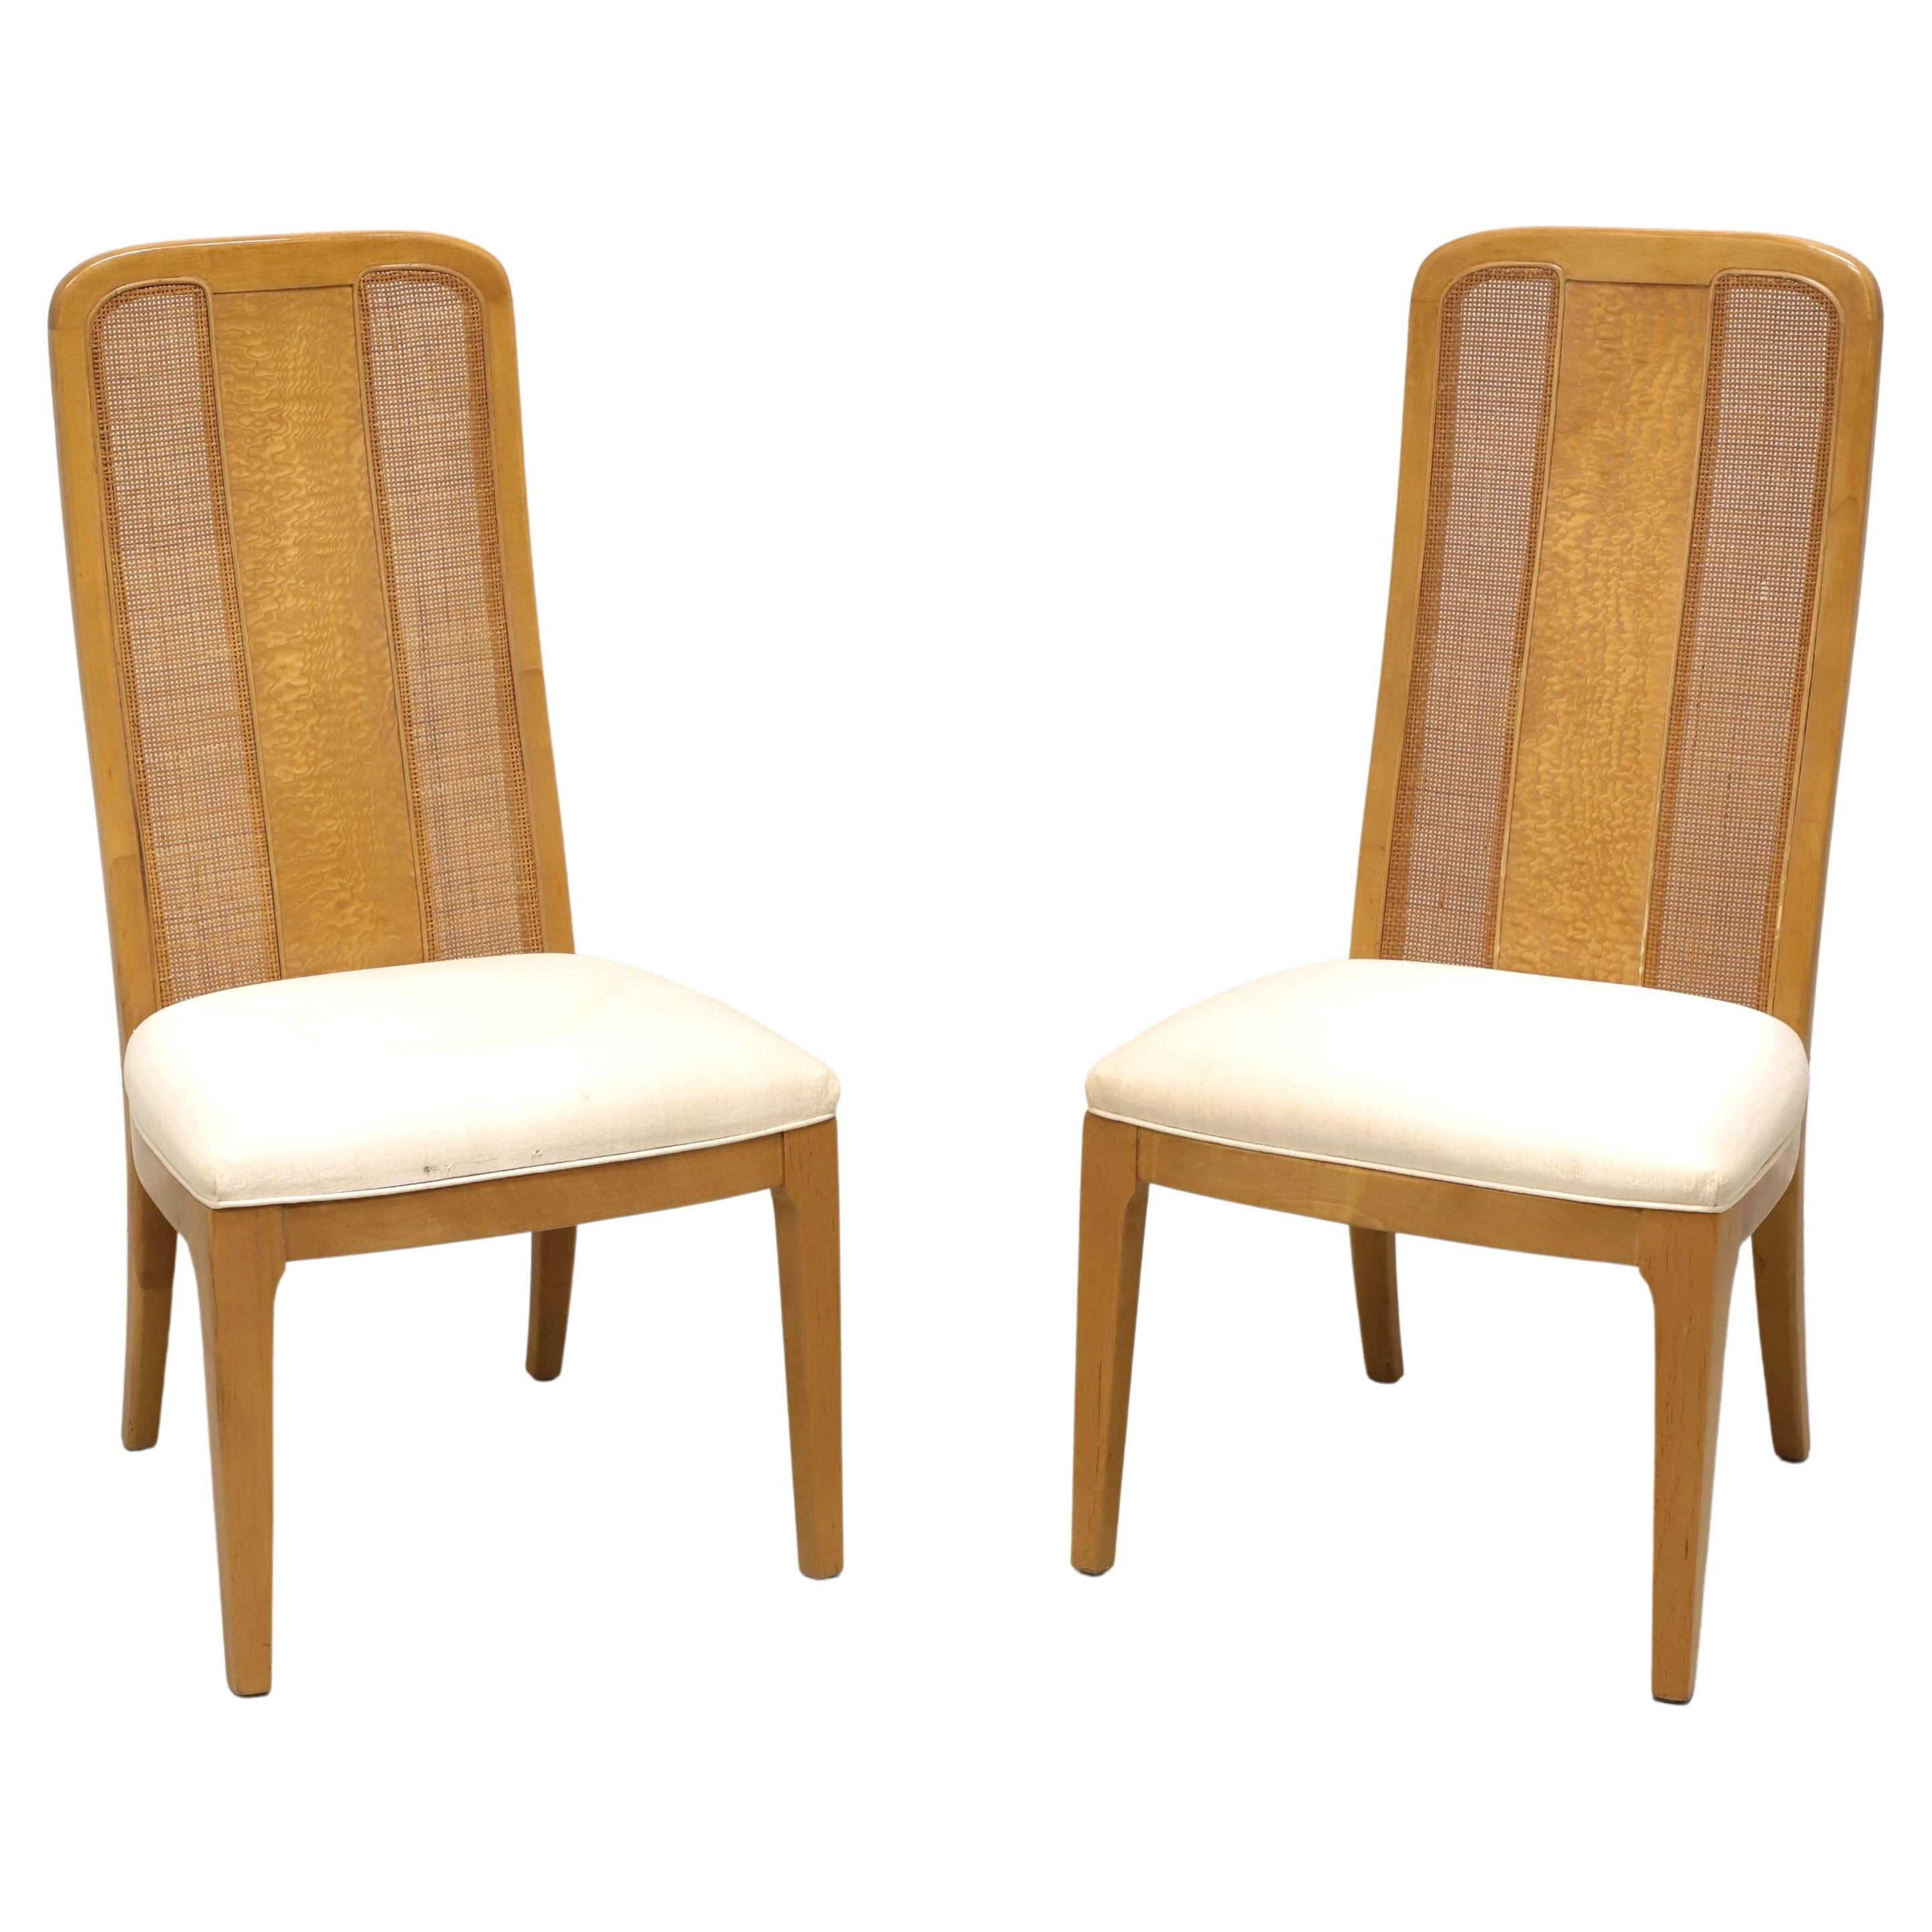 BERNHARDT Caned Burl Maple Contemporary Dining Side Chair - Pair B For Sale